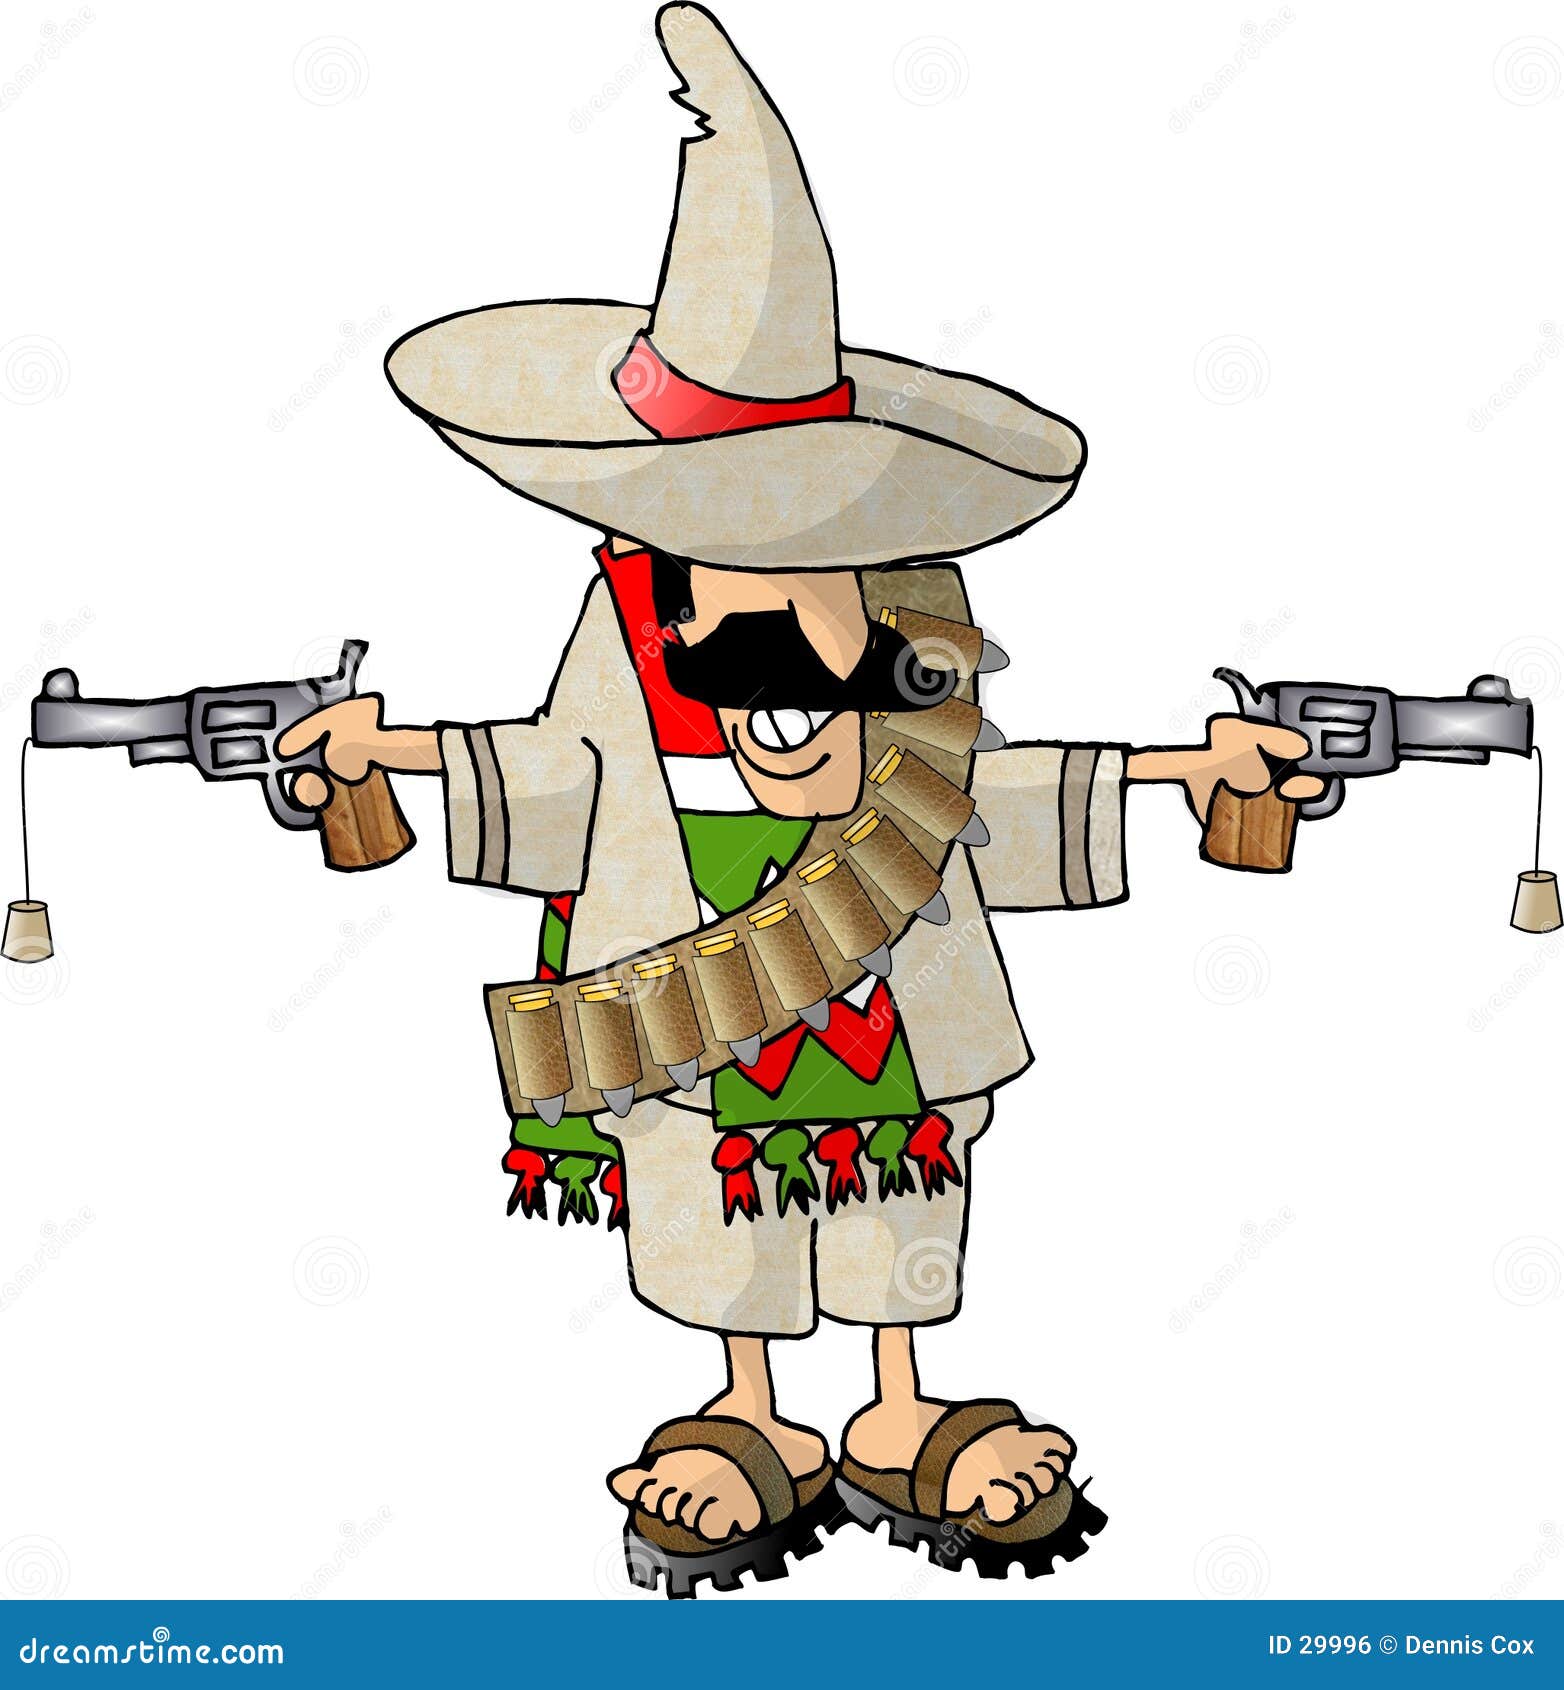 Bandito Cartoons, Illustrations & Vector Stock Images - 44 Pictures to